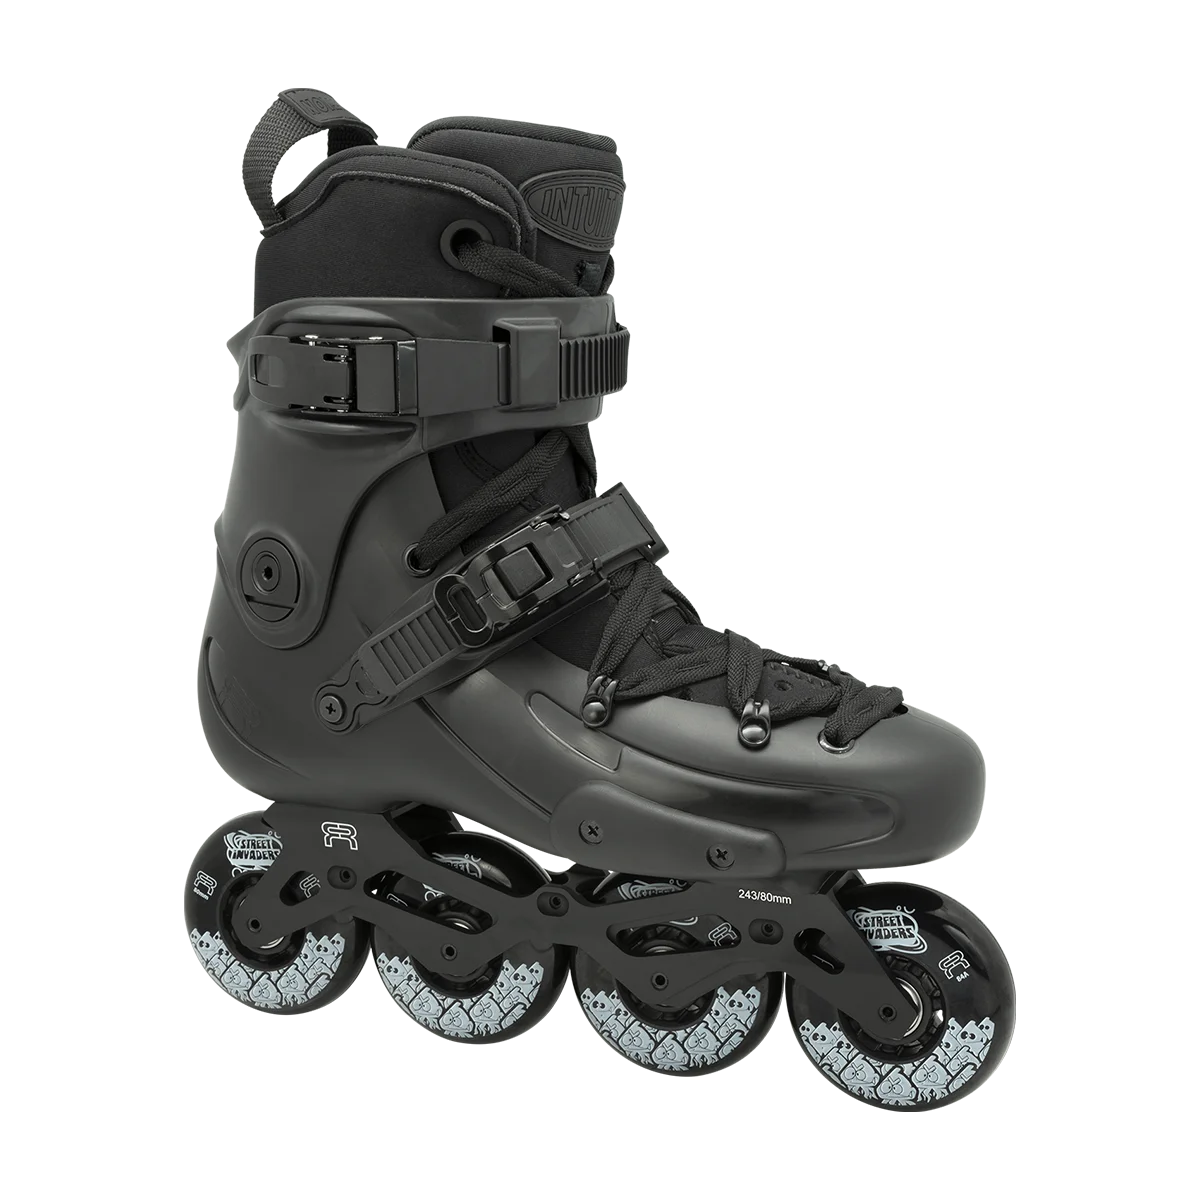 FR1 80 Deluxe Intuition 2023 Black Freeskates